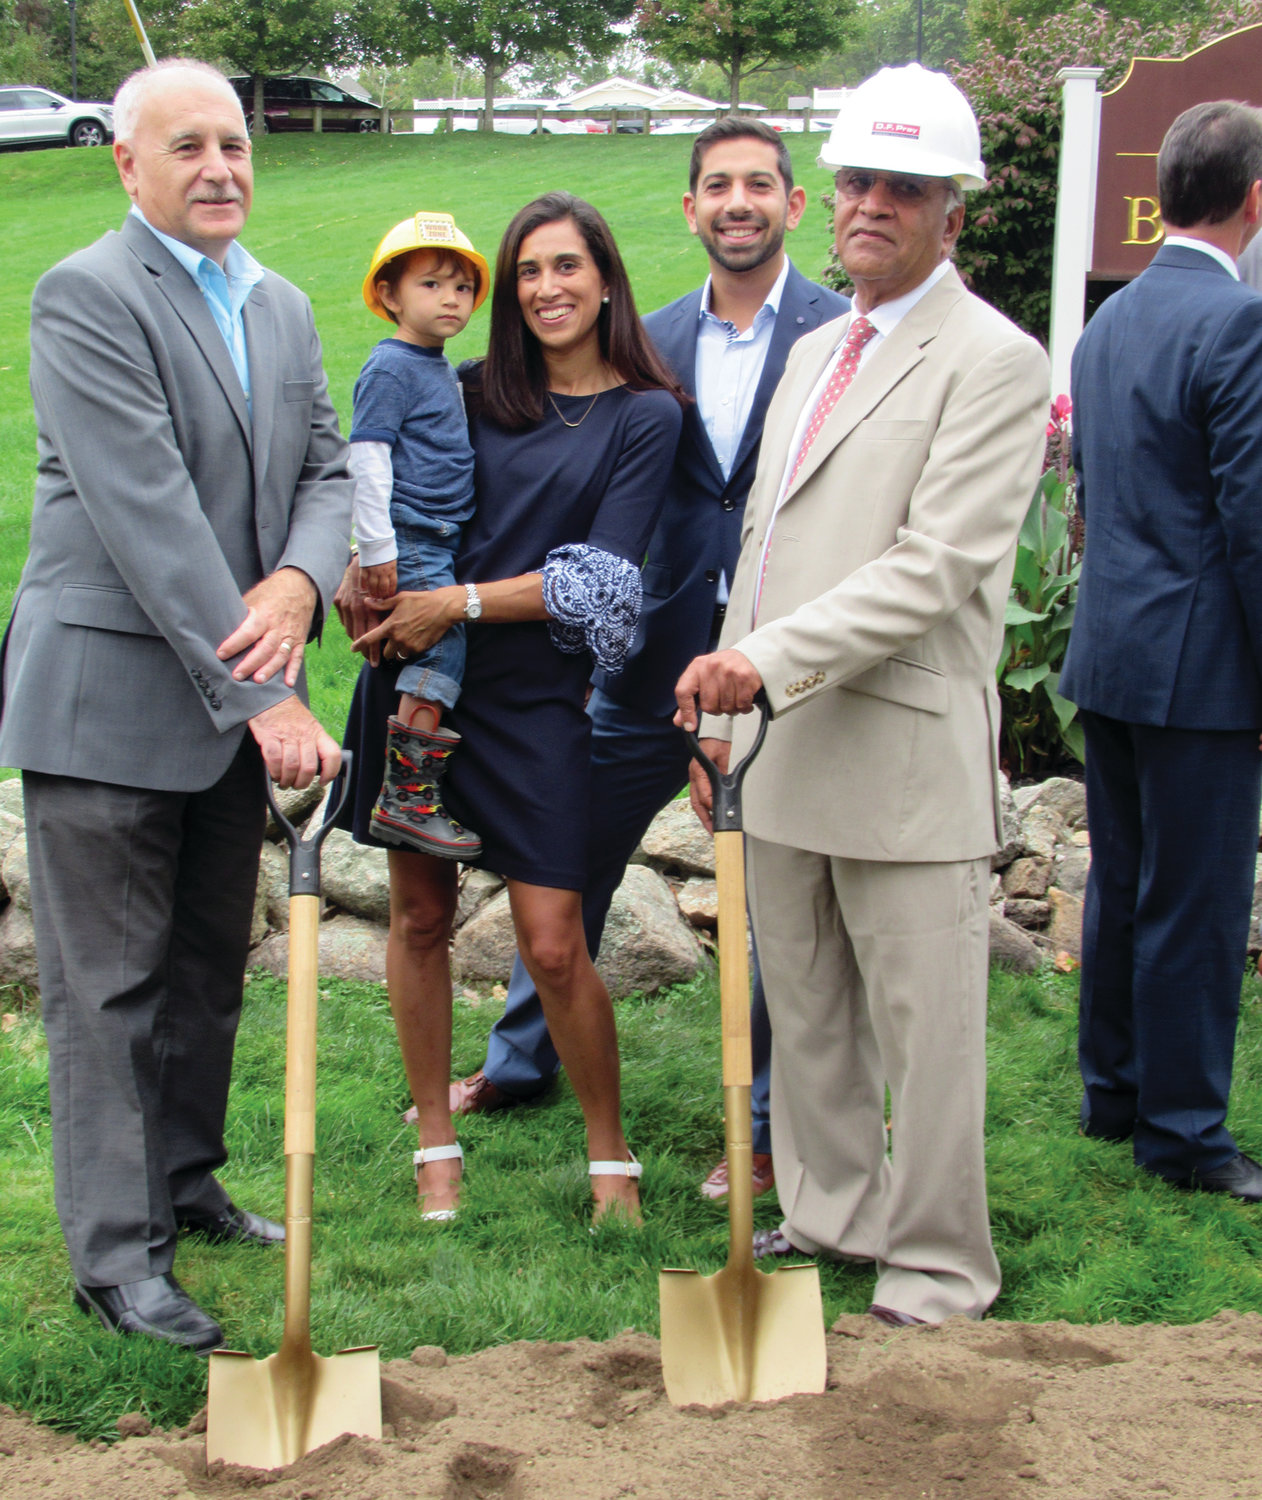 DELIGHTFUL DUTY: Mayor Joseph Polisena joins Akshay K. Talwar, CEO and president of the Briarcliffe Campus, and his grandson Benjamin Day, daughter Nisha Talwar and son Anand Talwar during last Wednesday’s event.